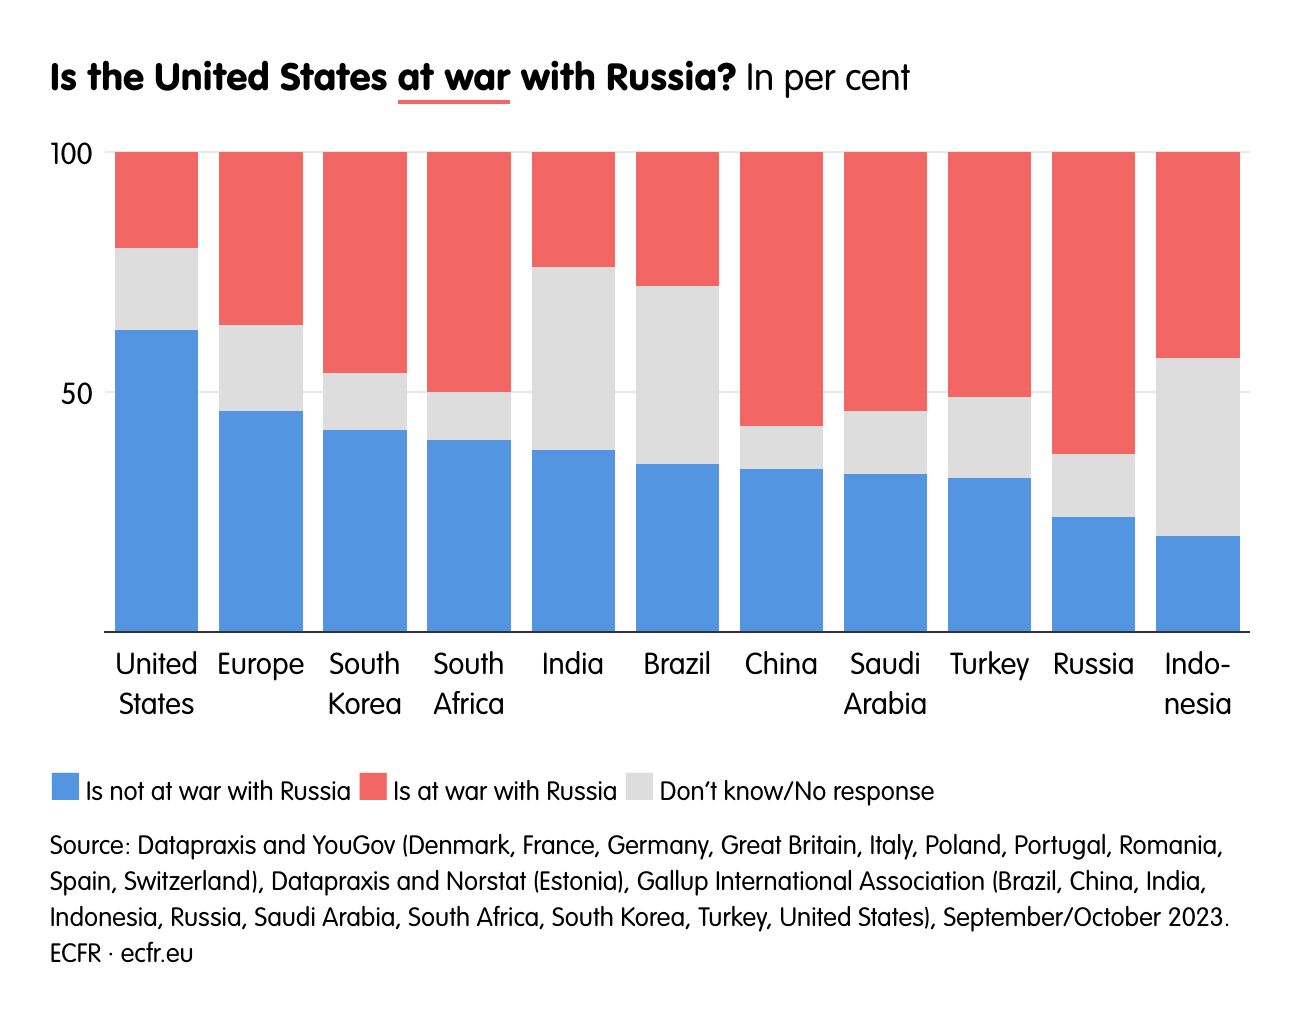 Is the United States at war with Russia?